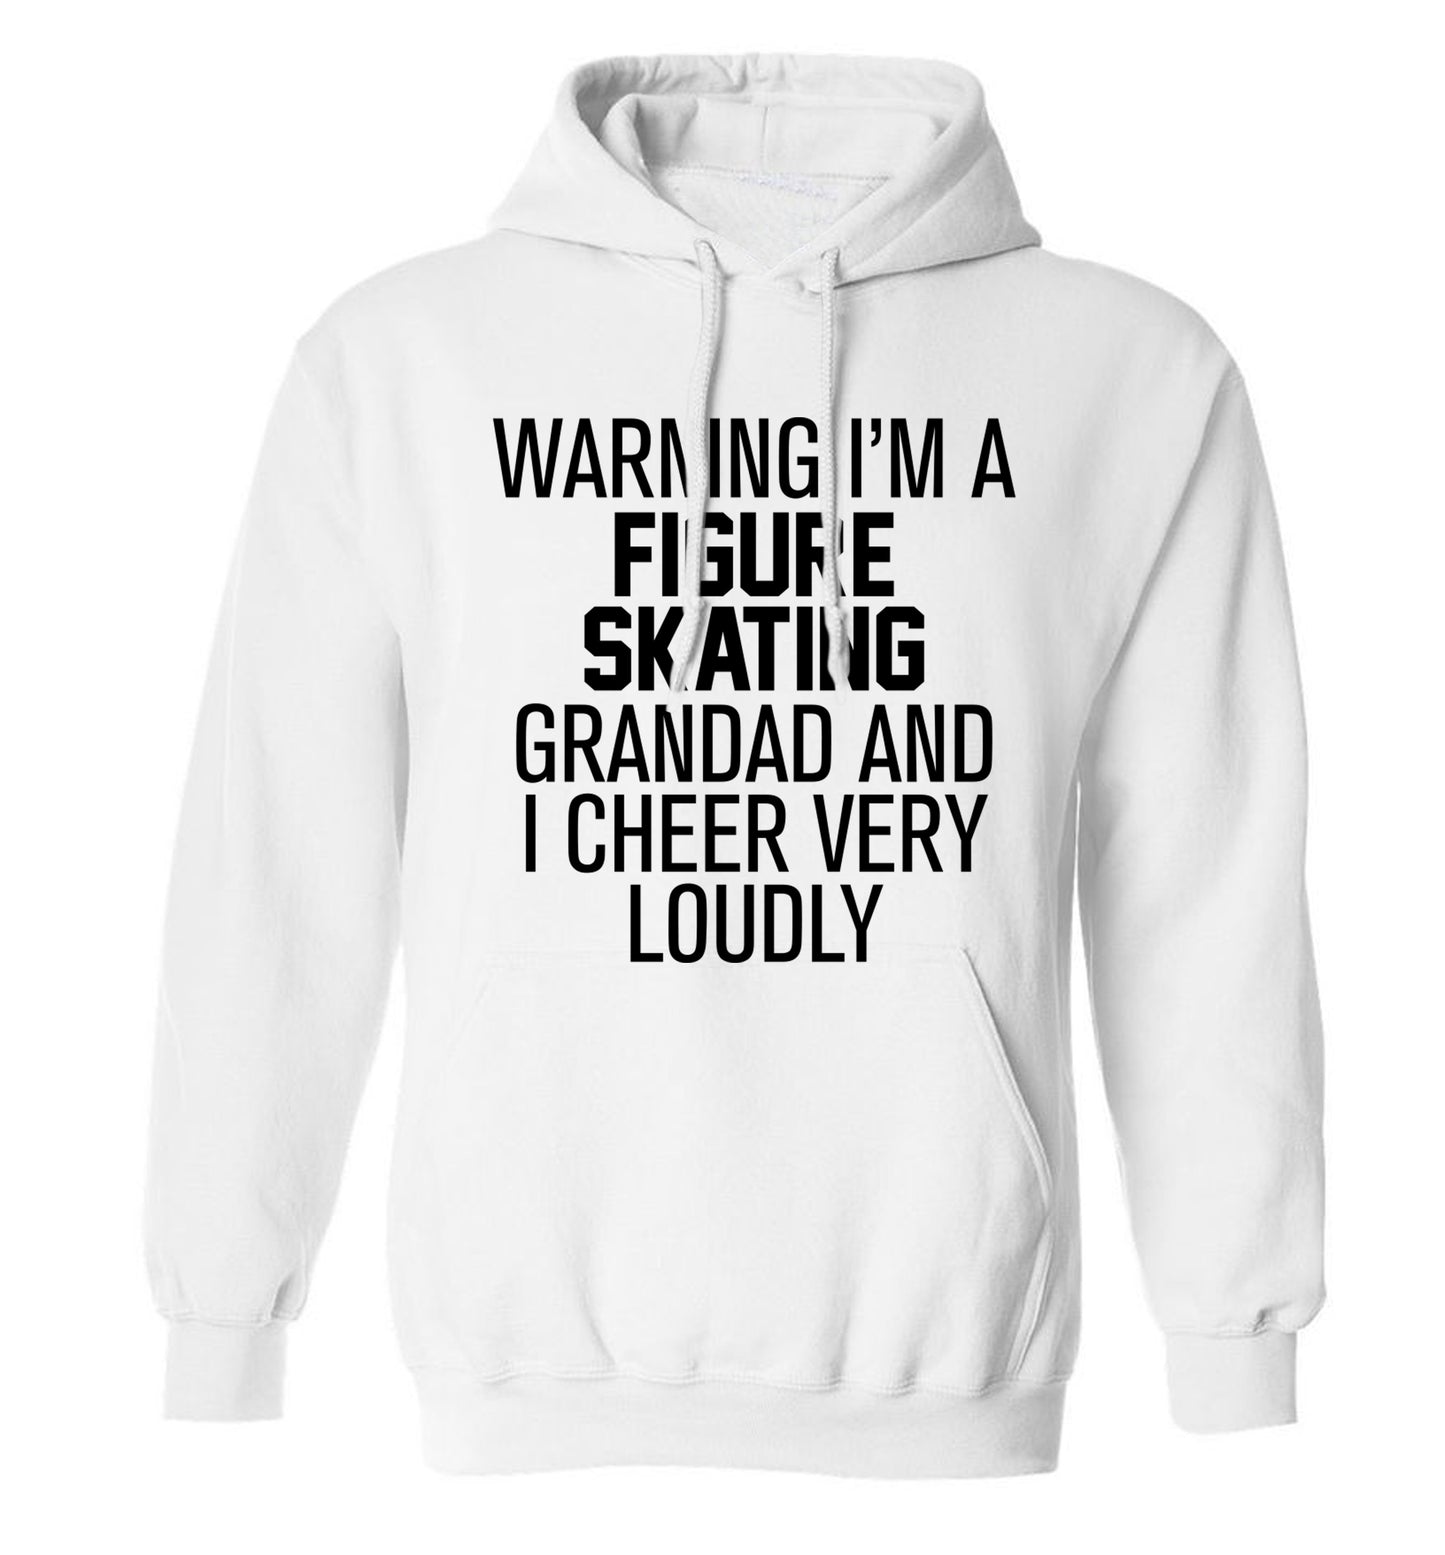 Warning I'm a figure skating grandad and I cheer very loudly adults unisexwhite hoodie 2XL